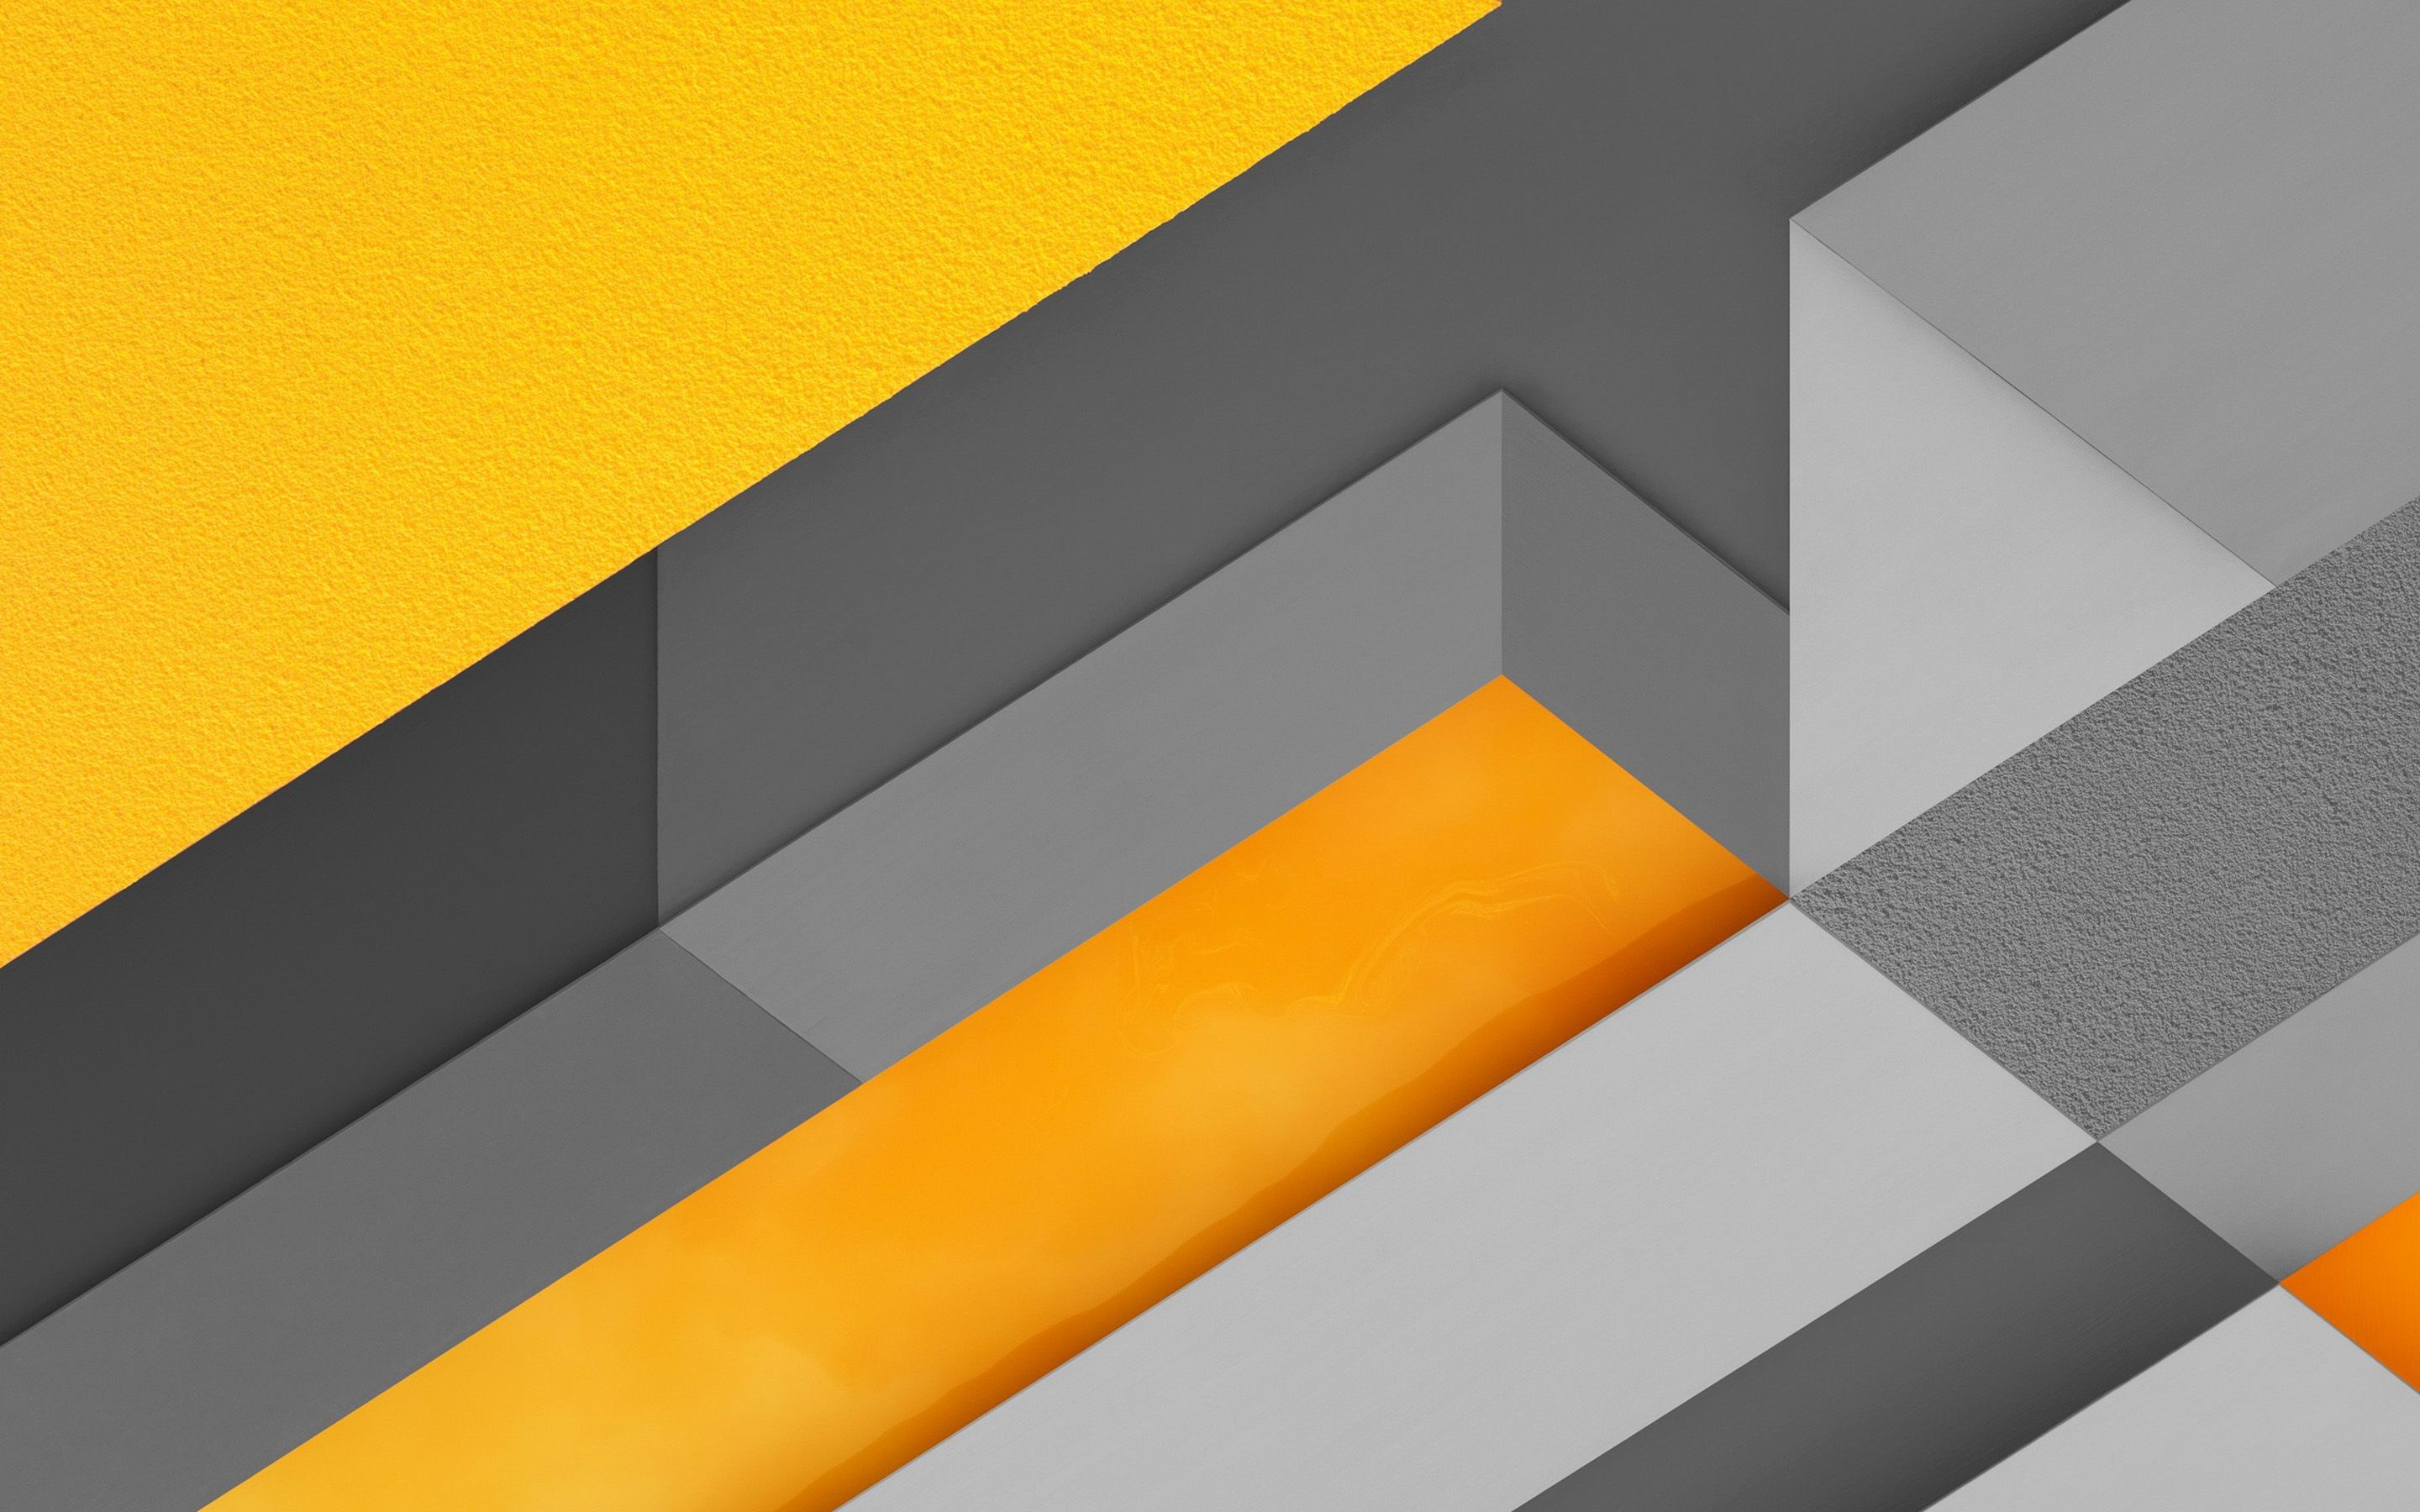 Download wallpaper 4k, material design, yellow and gray, geometric shapes, lines, lollipop, geometry, creative, strips, yellow background, abstract art for desktop with resolution 2880x1800. High Quality HD picture wallpaper